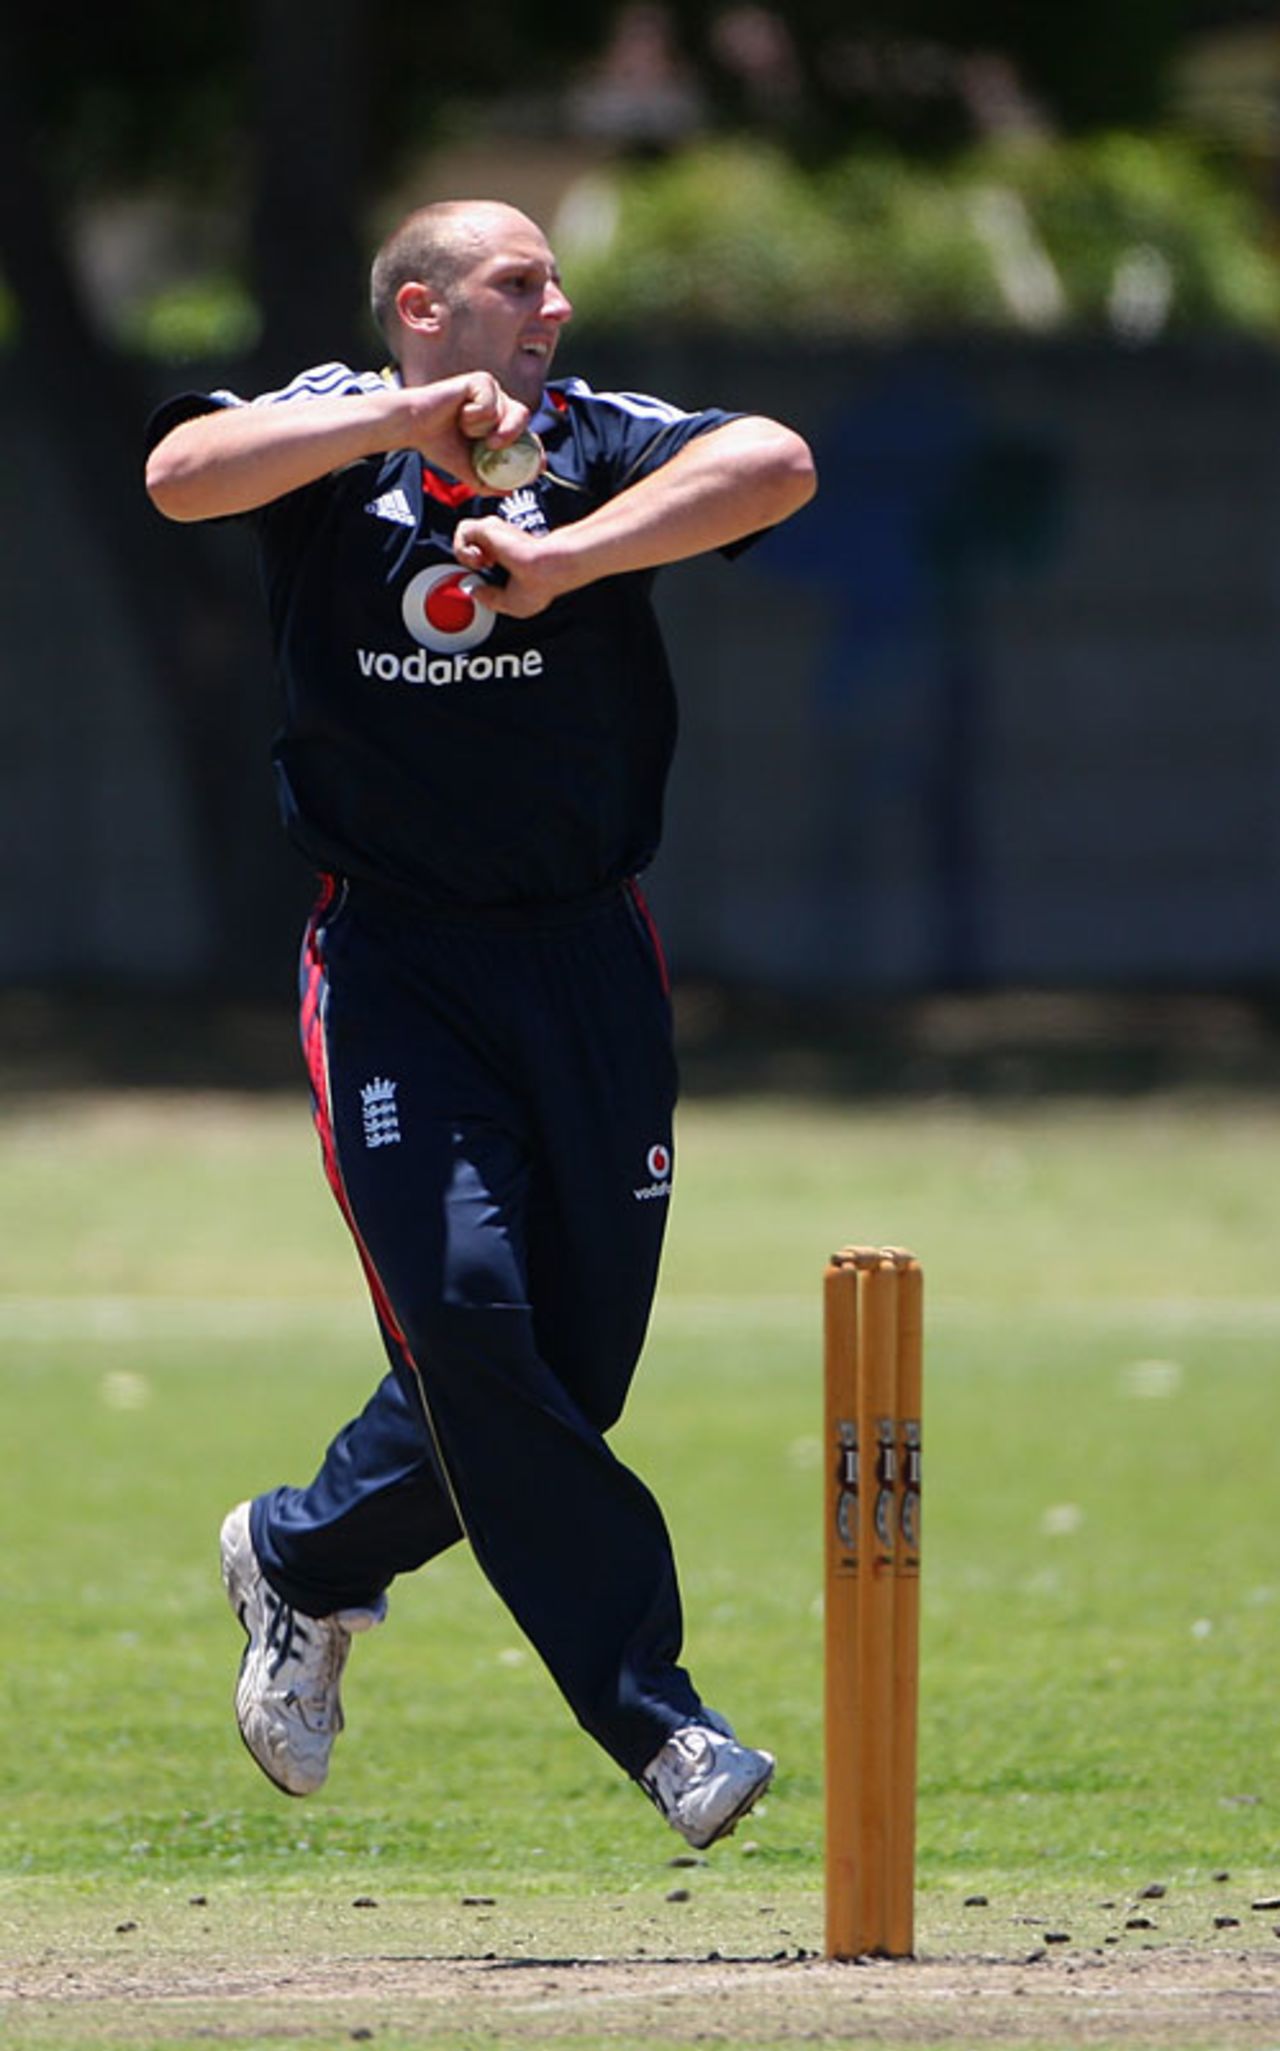 James Tredwell could make his international debut on Friday in England's third ODI against South Africa at Newlands, November 25, 2009